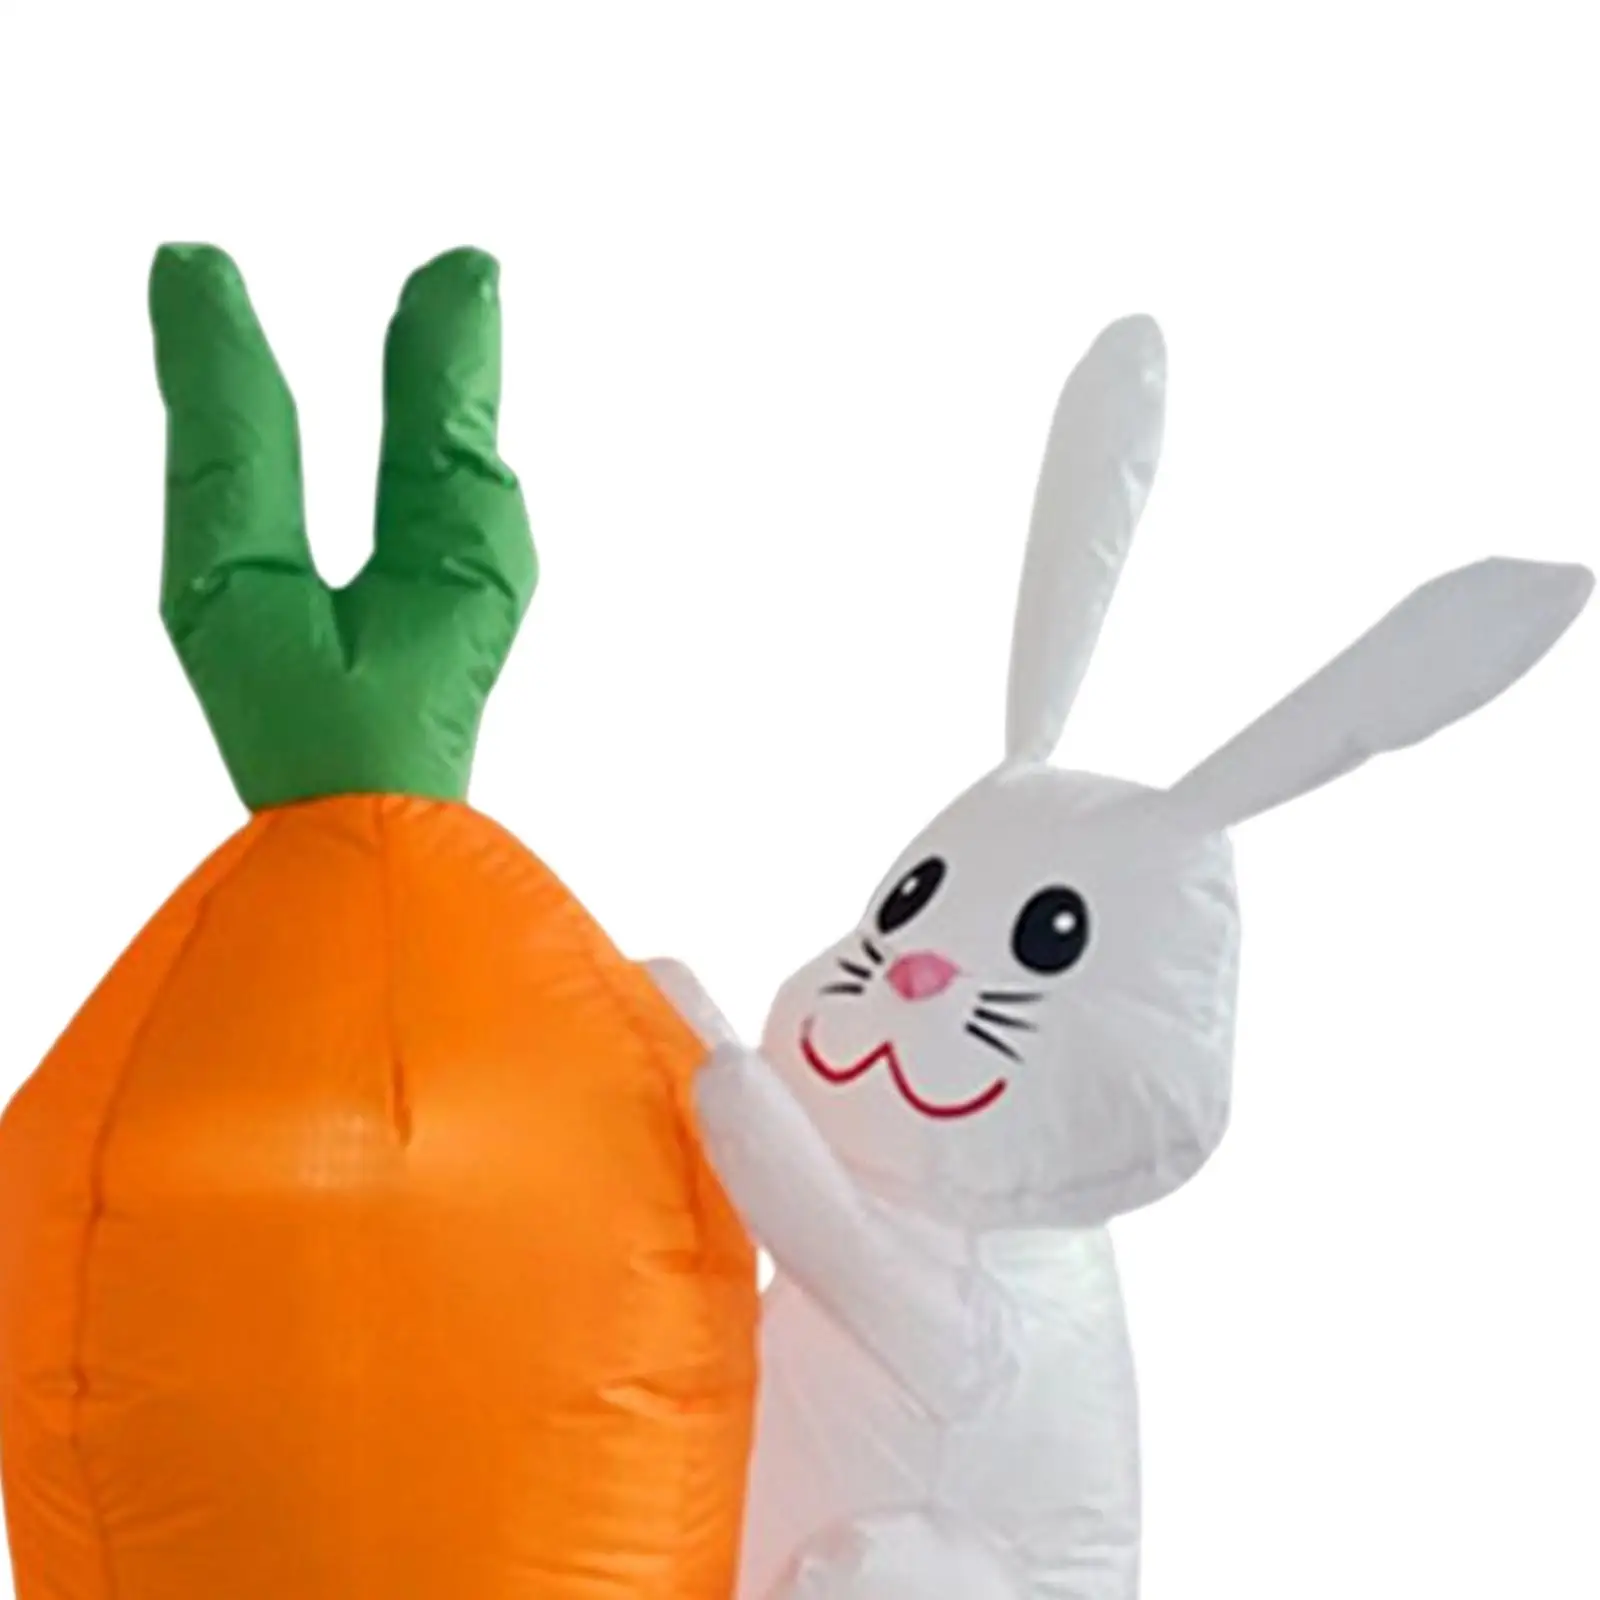 

5.9ft Easter Inflatable Bunny and Carrot Built in LEDs Light up Decoration Decorative Carrot for Party Holiday Home Yard Decor